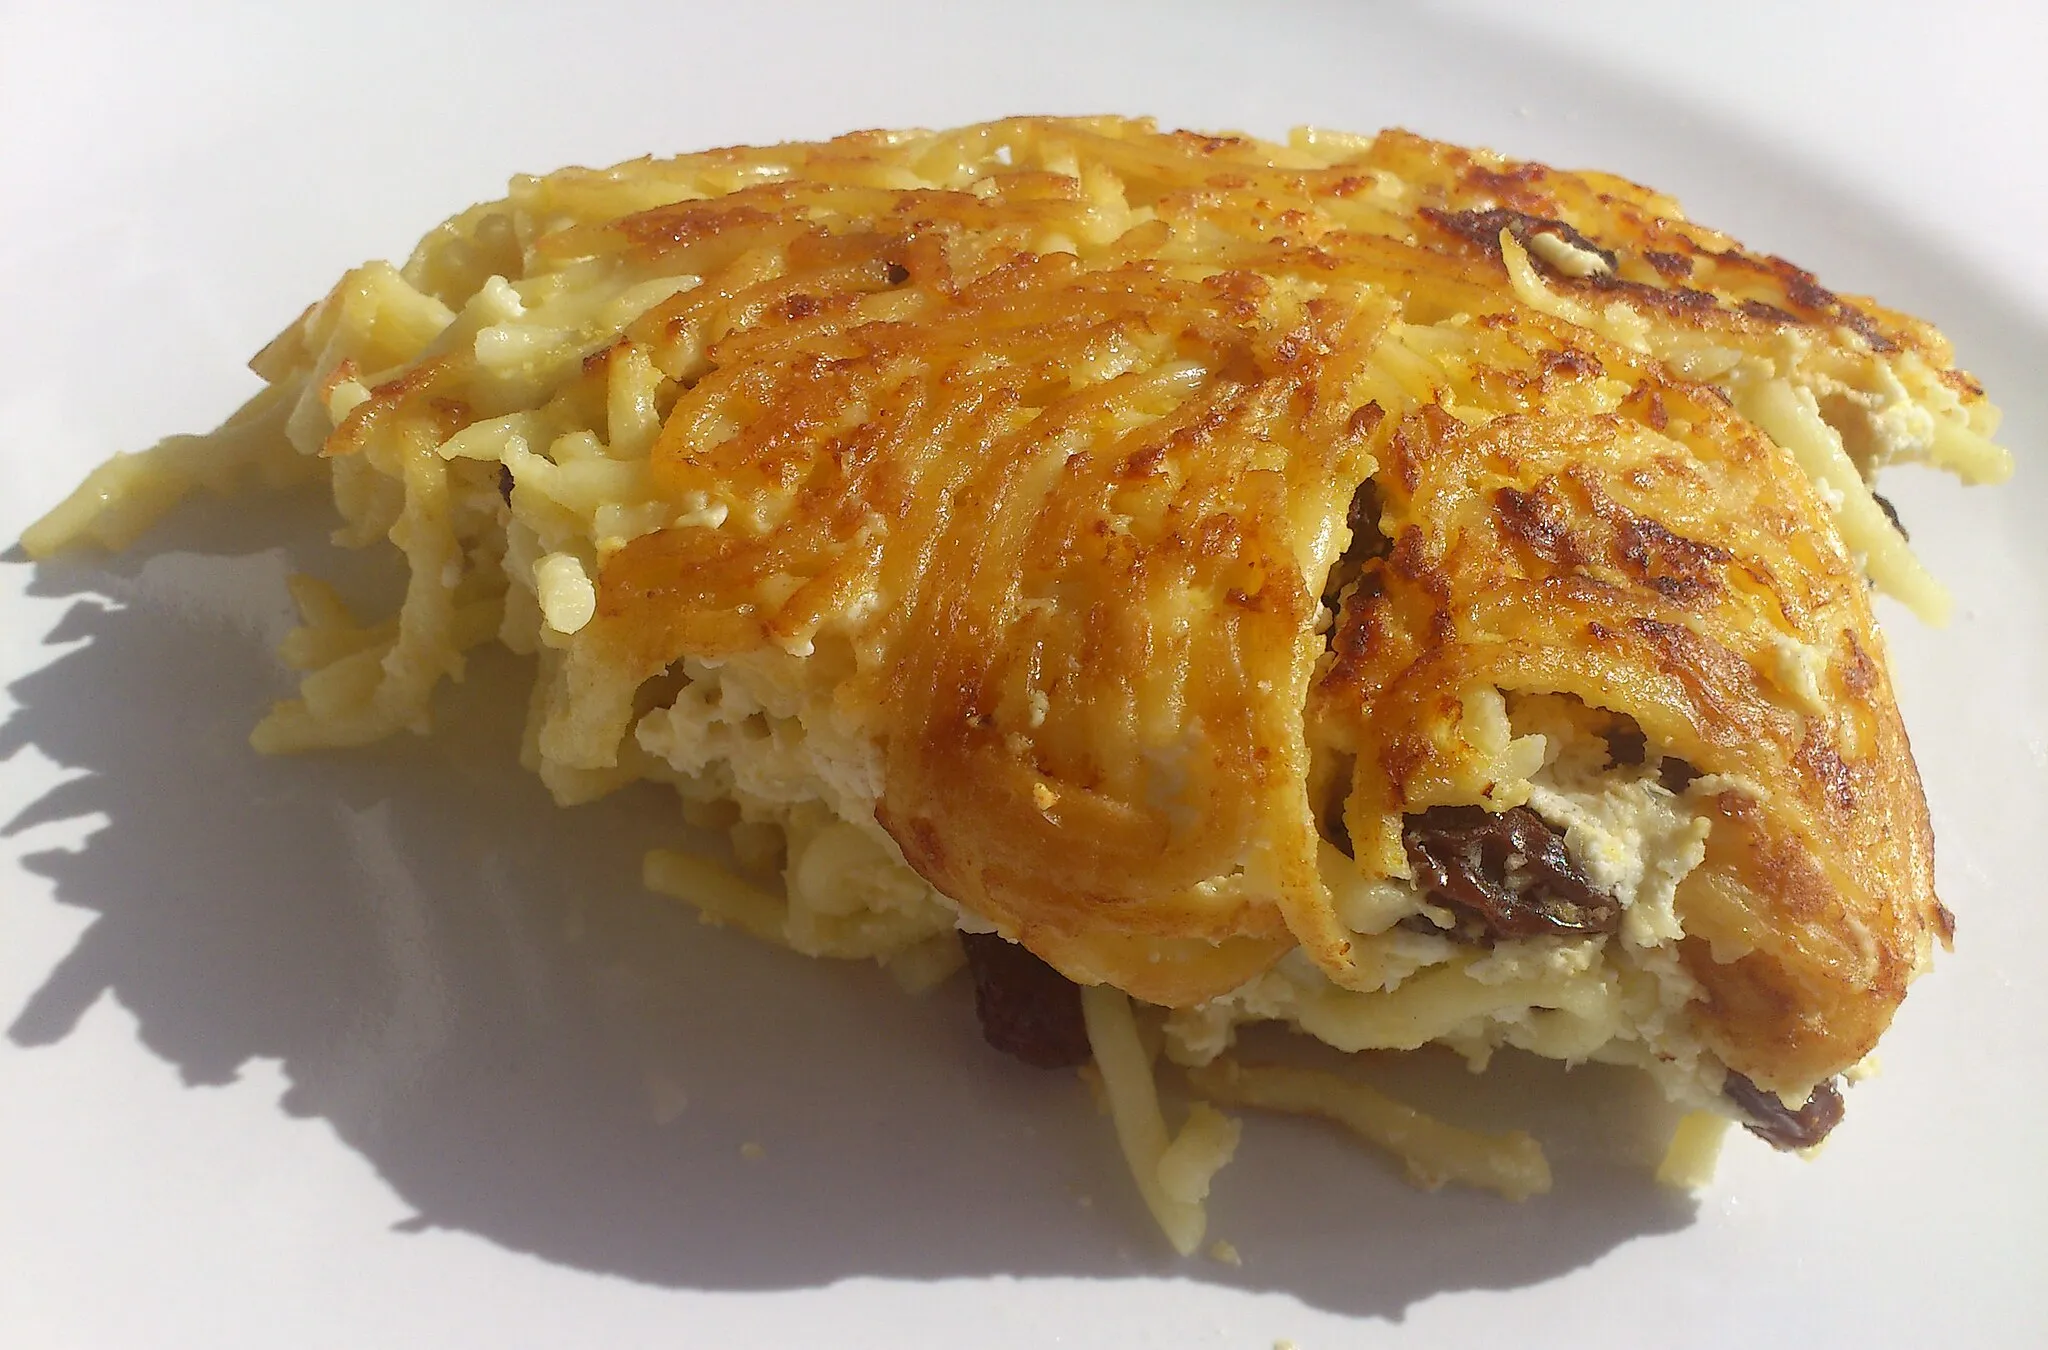 Photo showing: Noodle kugel made with curd cheese, eggs and raisins